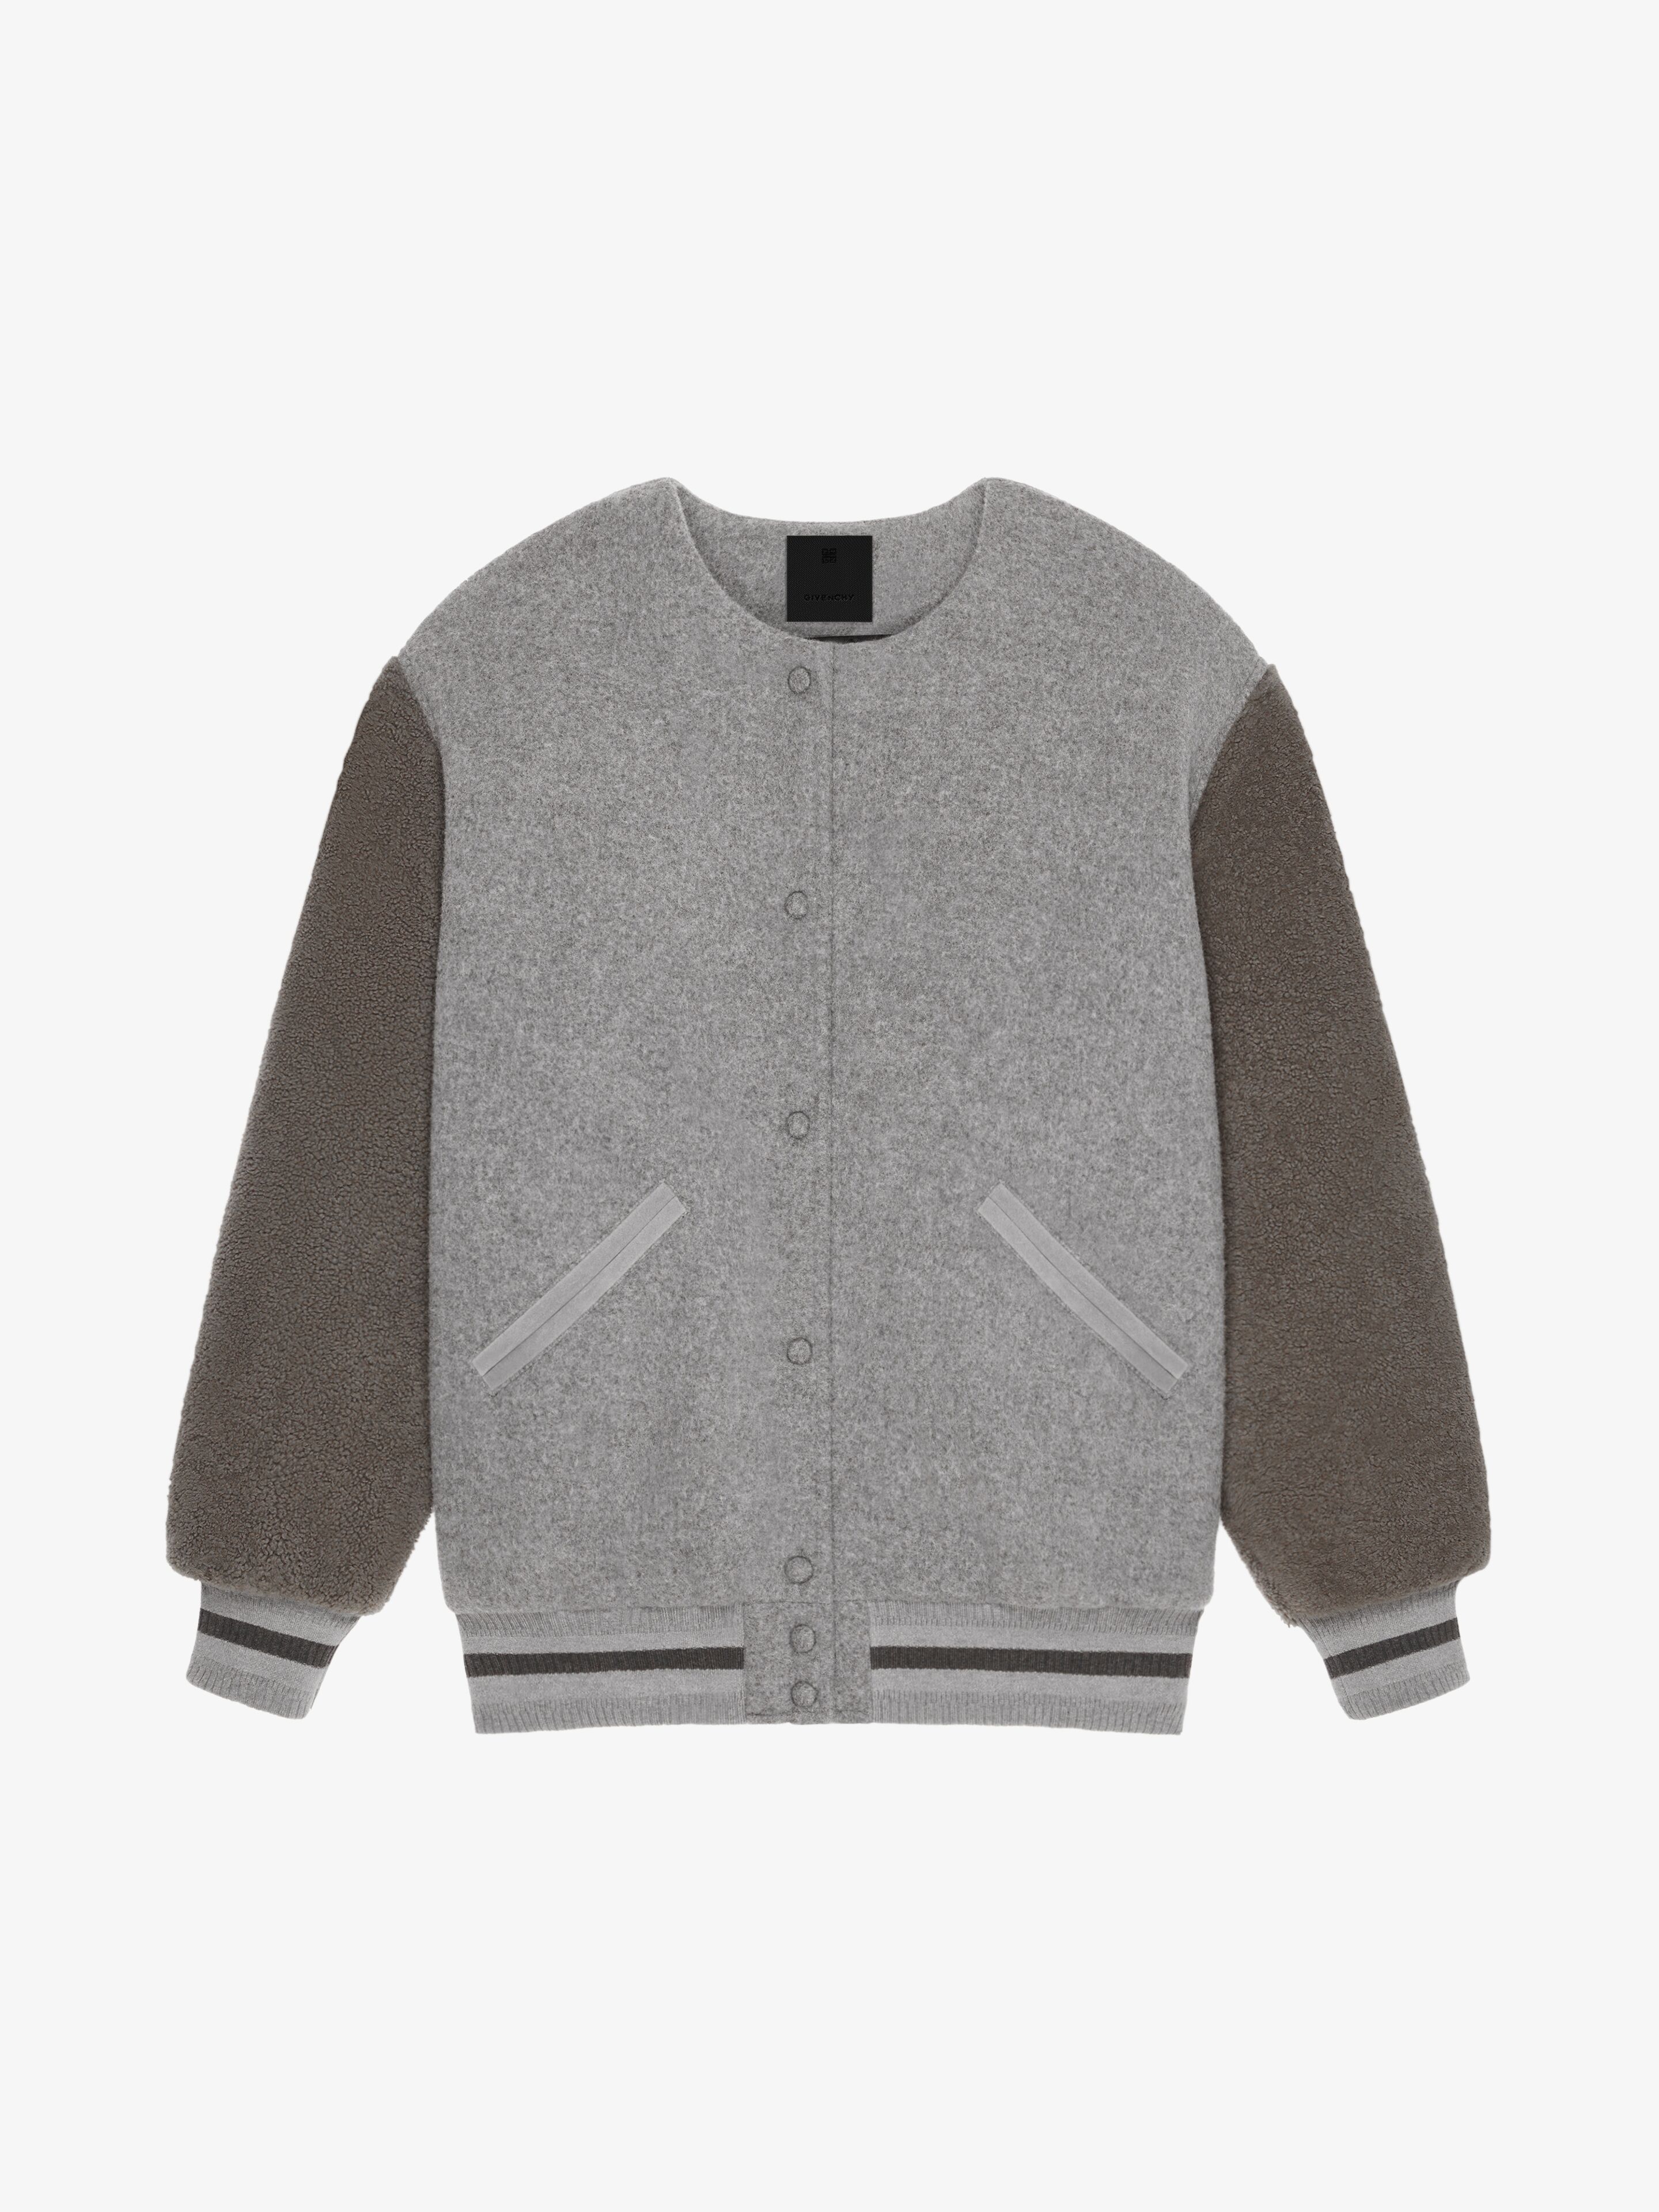 Shop Givenchy Oversized Varsity Jacket In Double Face Wool And Shearling In Light Grey Melange